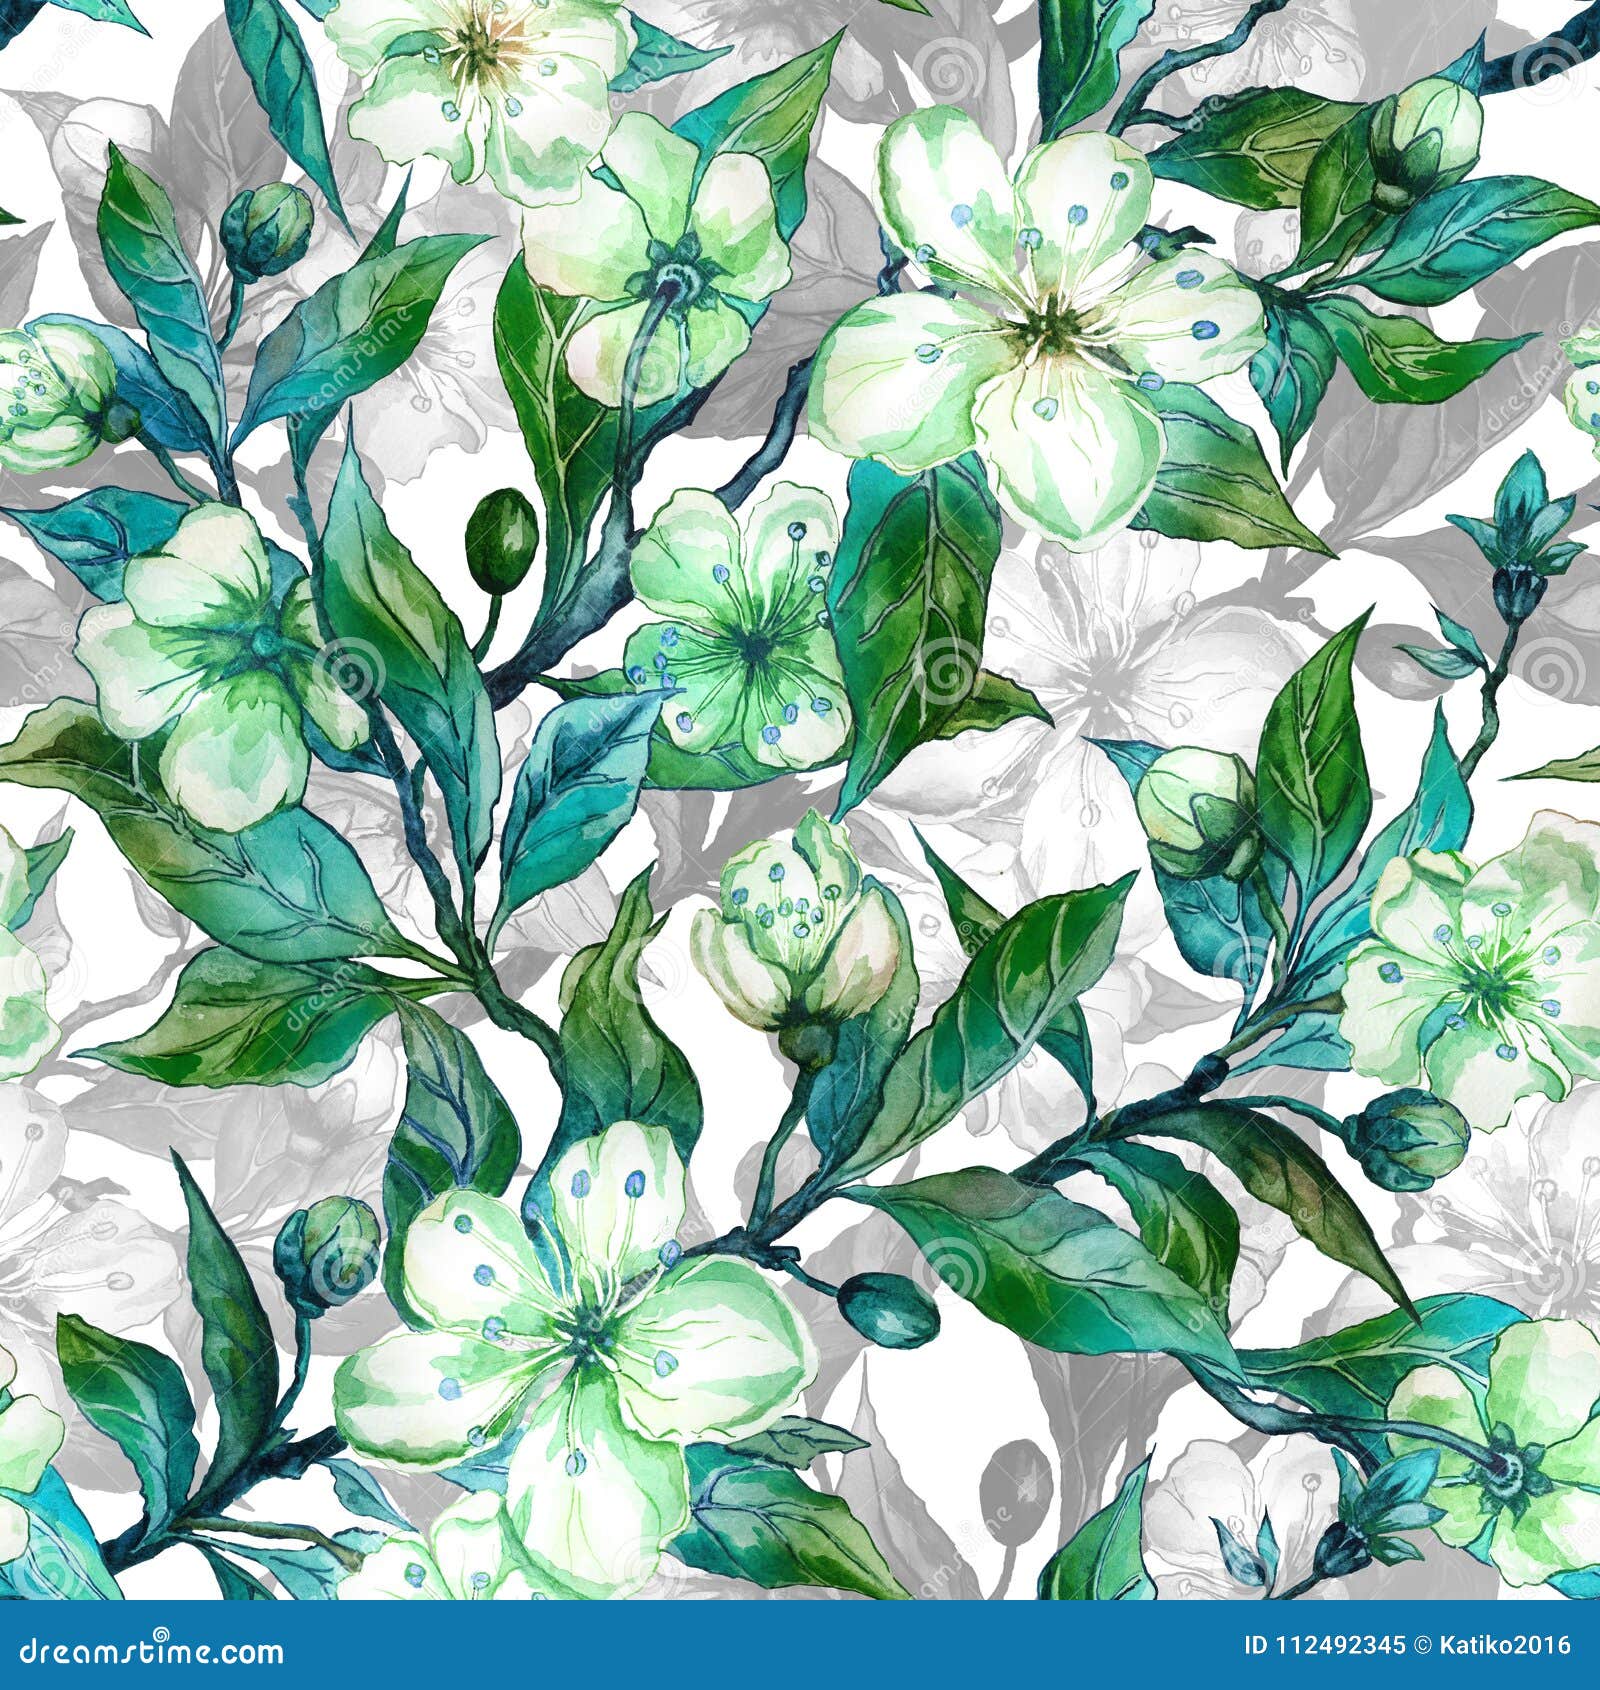 beautiful fruit tree twigs in bloom. white and green flowers with outlines on white background. seamless spring floral pattern.